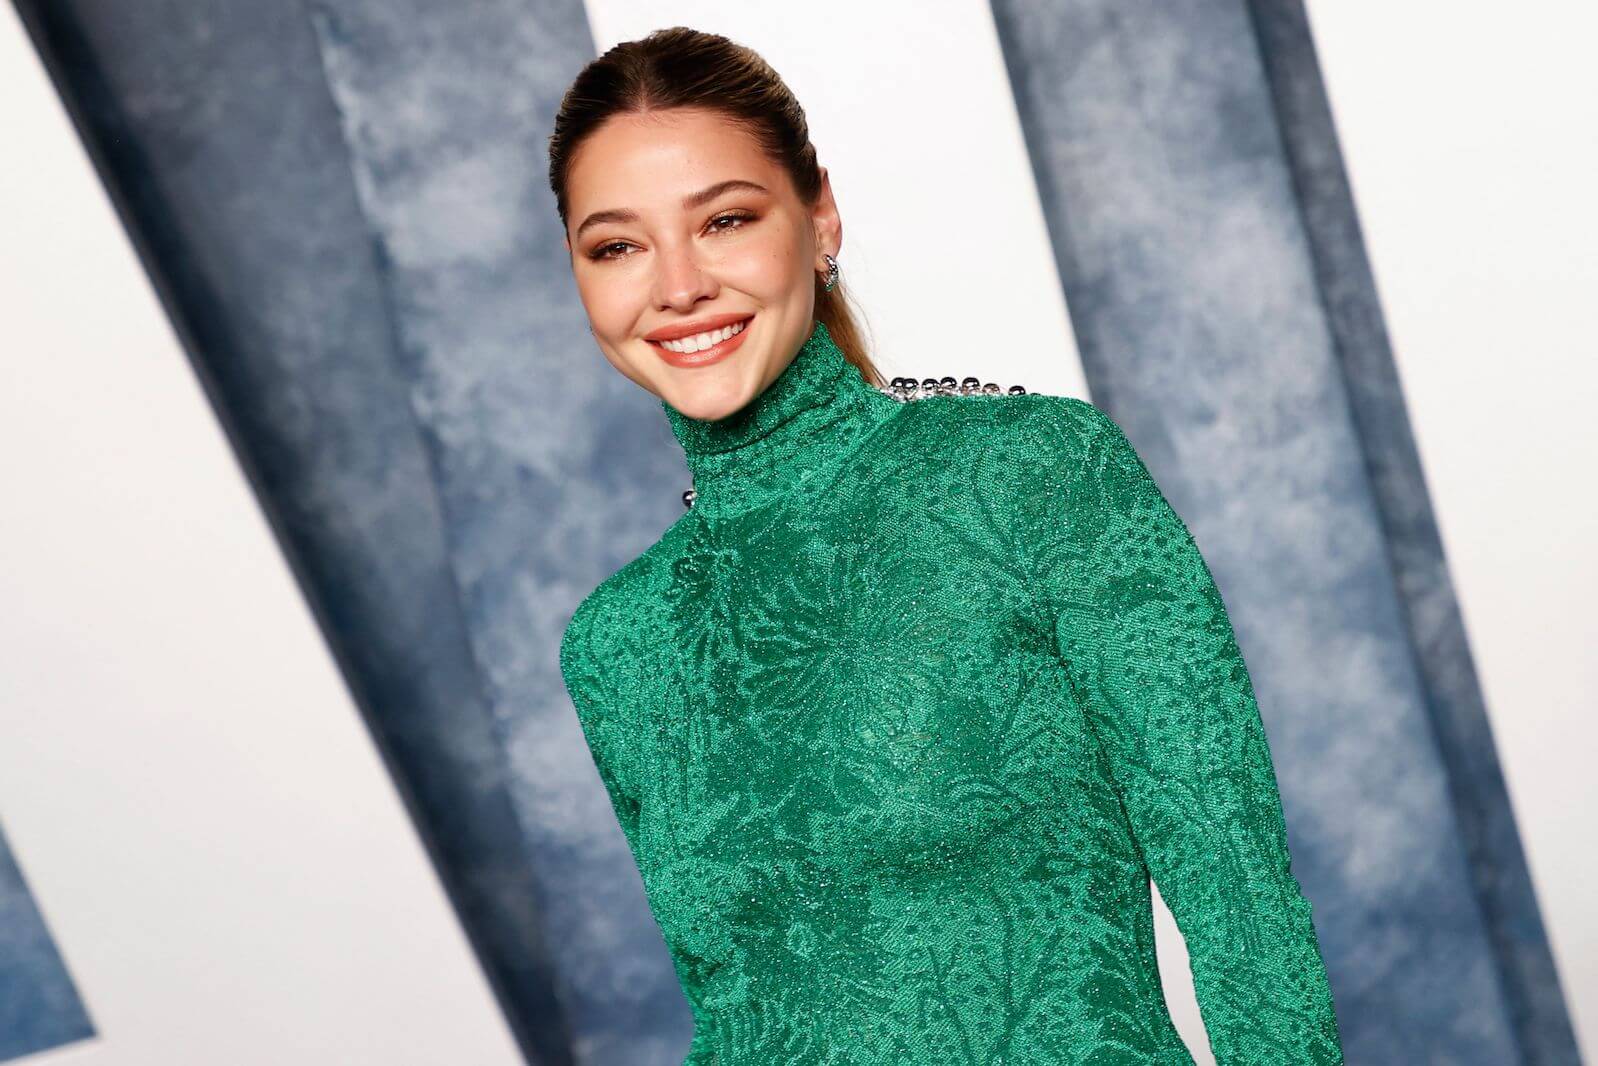 'Outer Banks' star Madelyn Cline in a high-neck green dress at an event